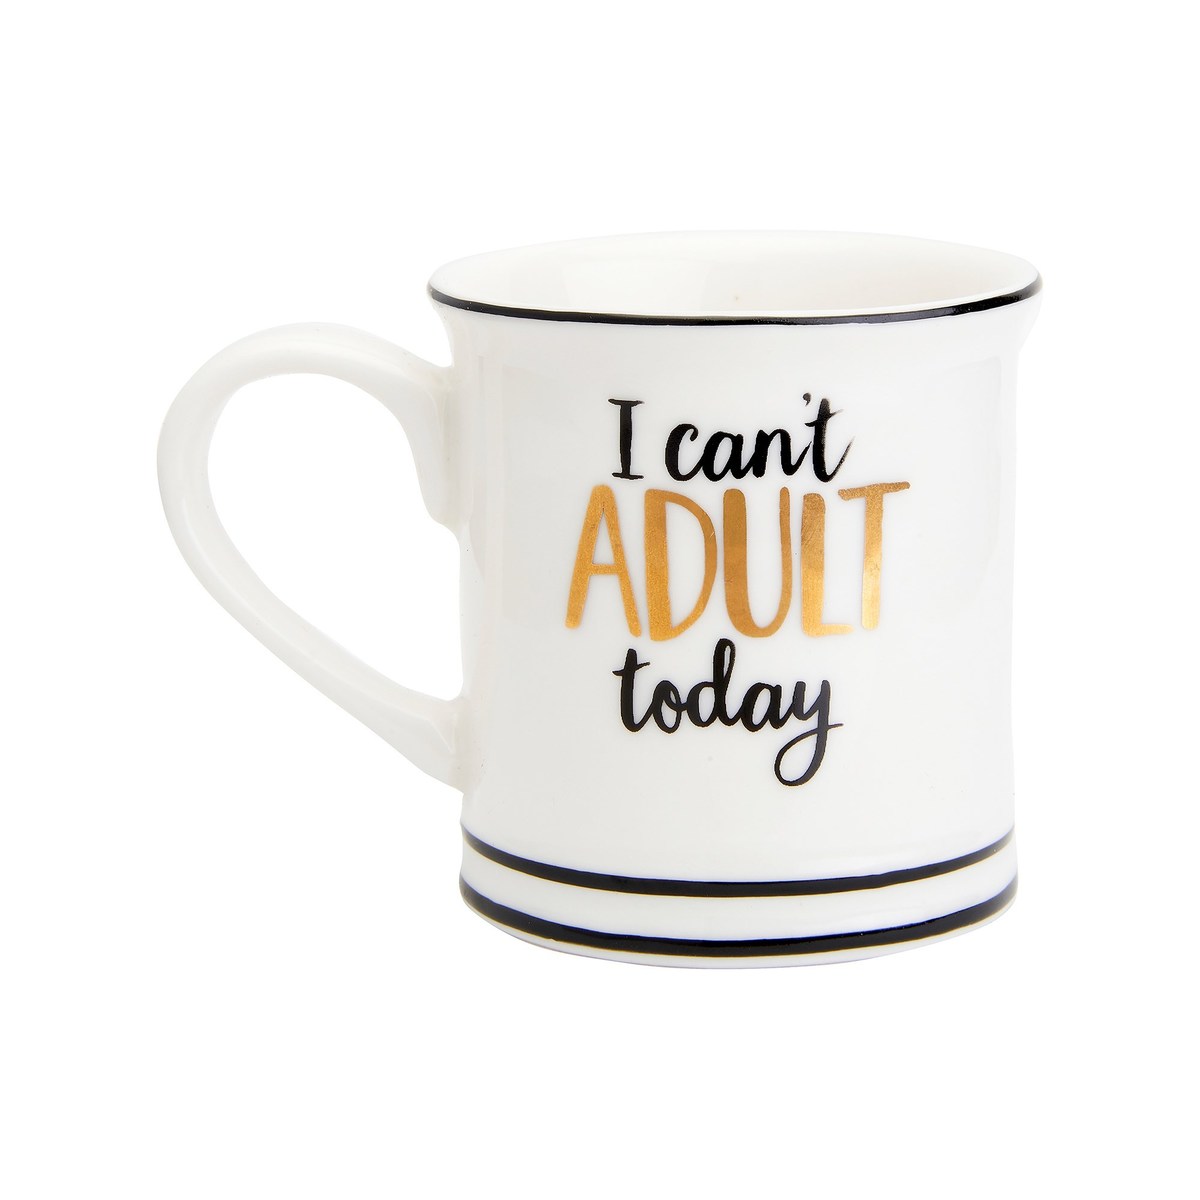 Hrnek - I CAN'T ADULT TODAY ESPRESSO CUP